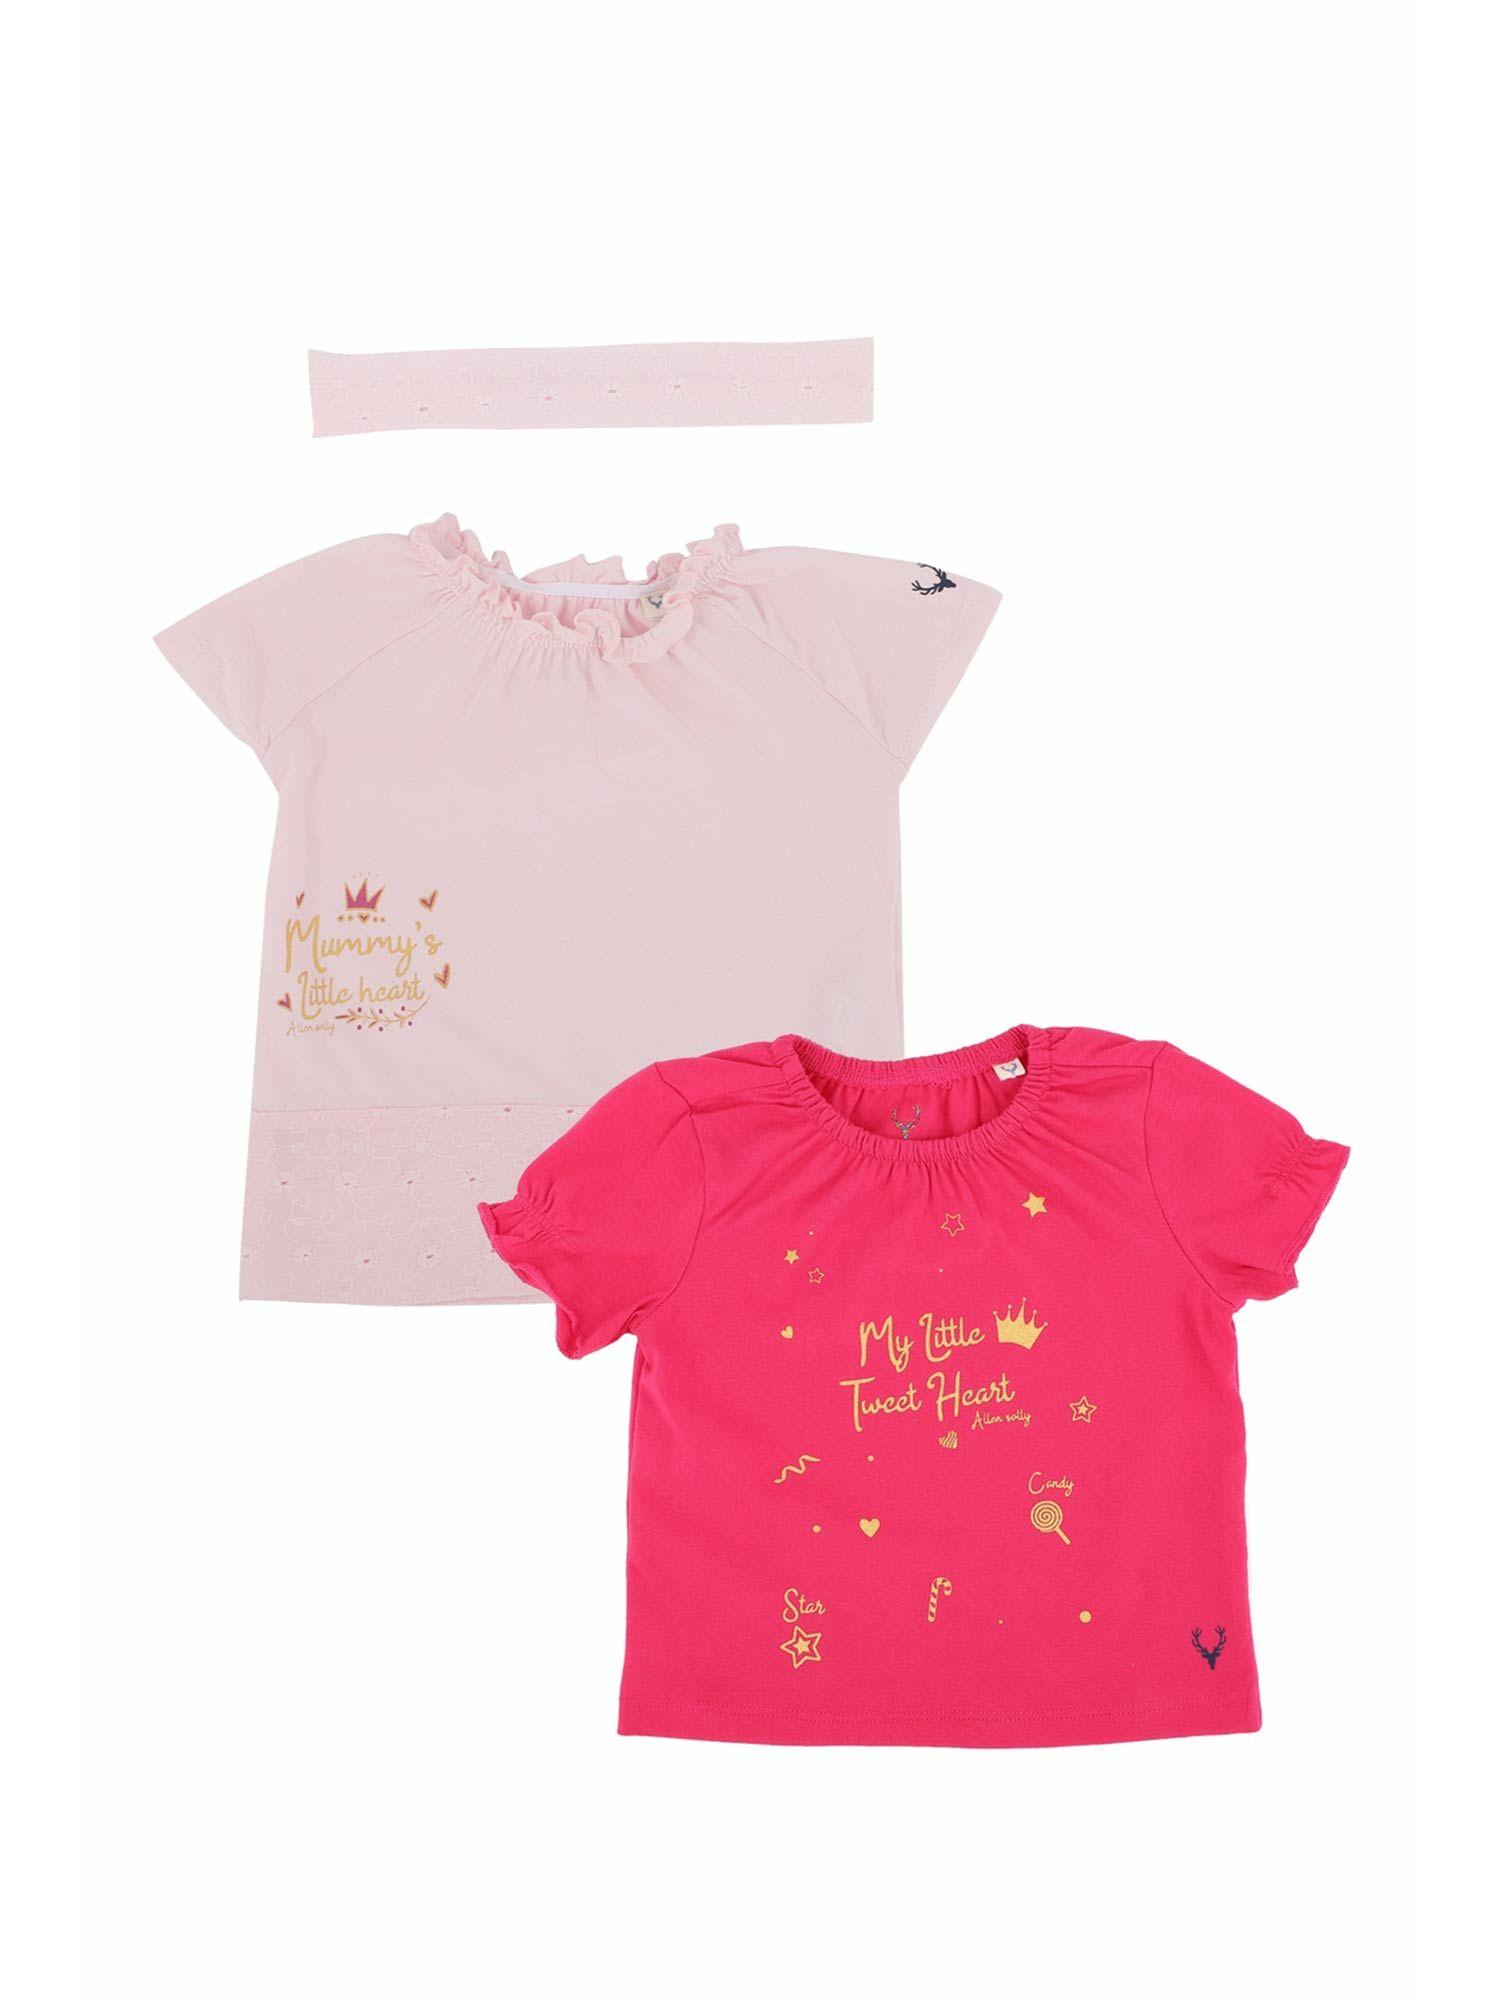 pink t shirts and one hairband (set of 3)